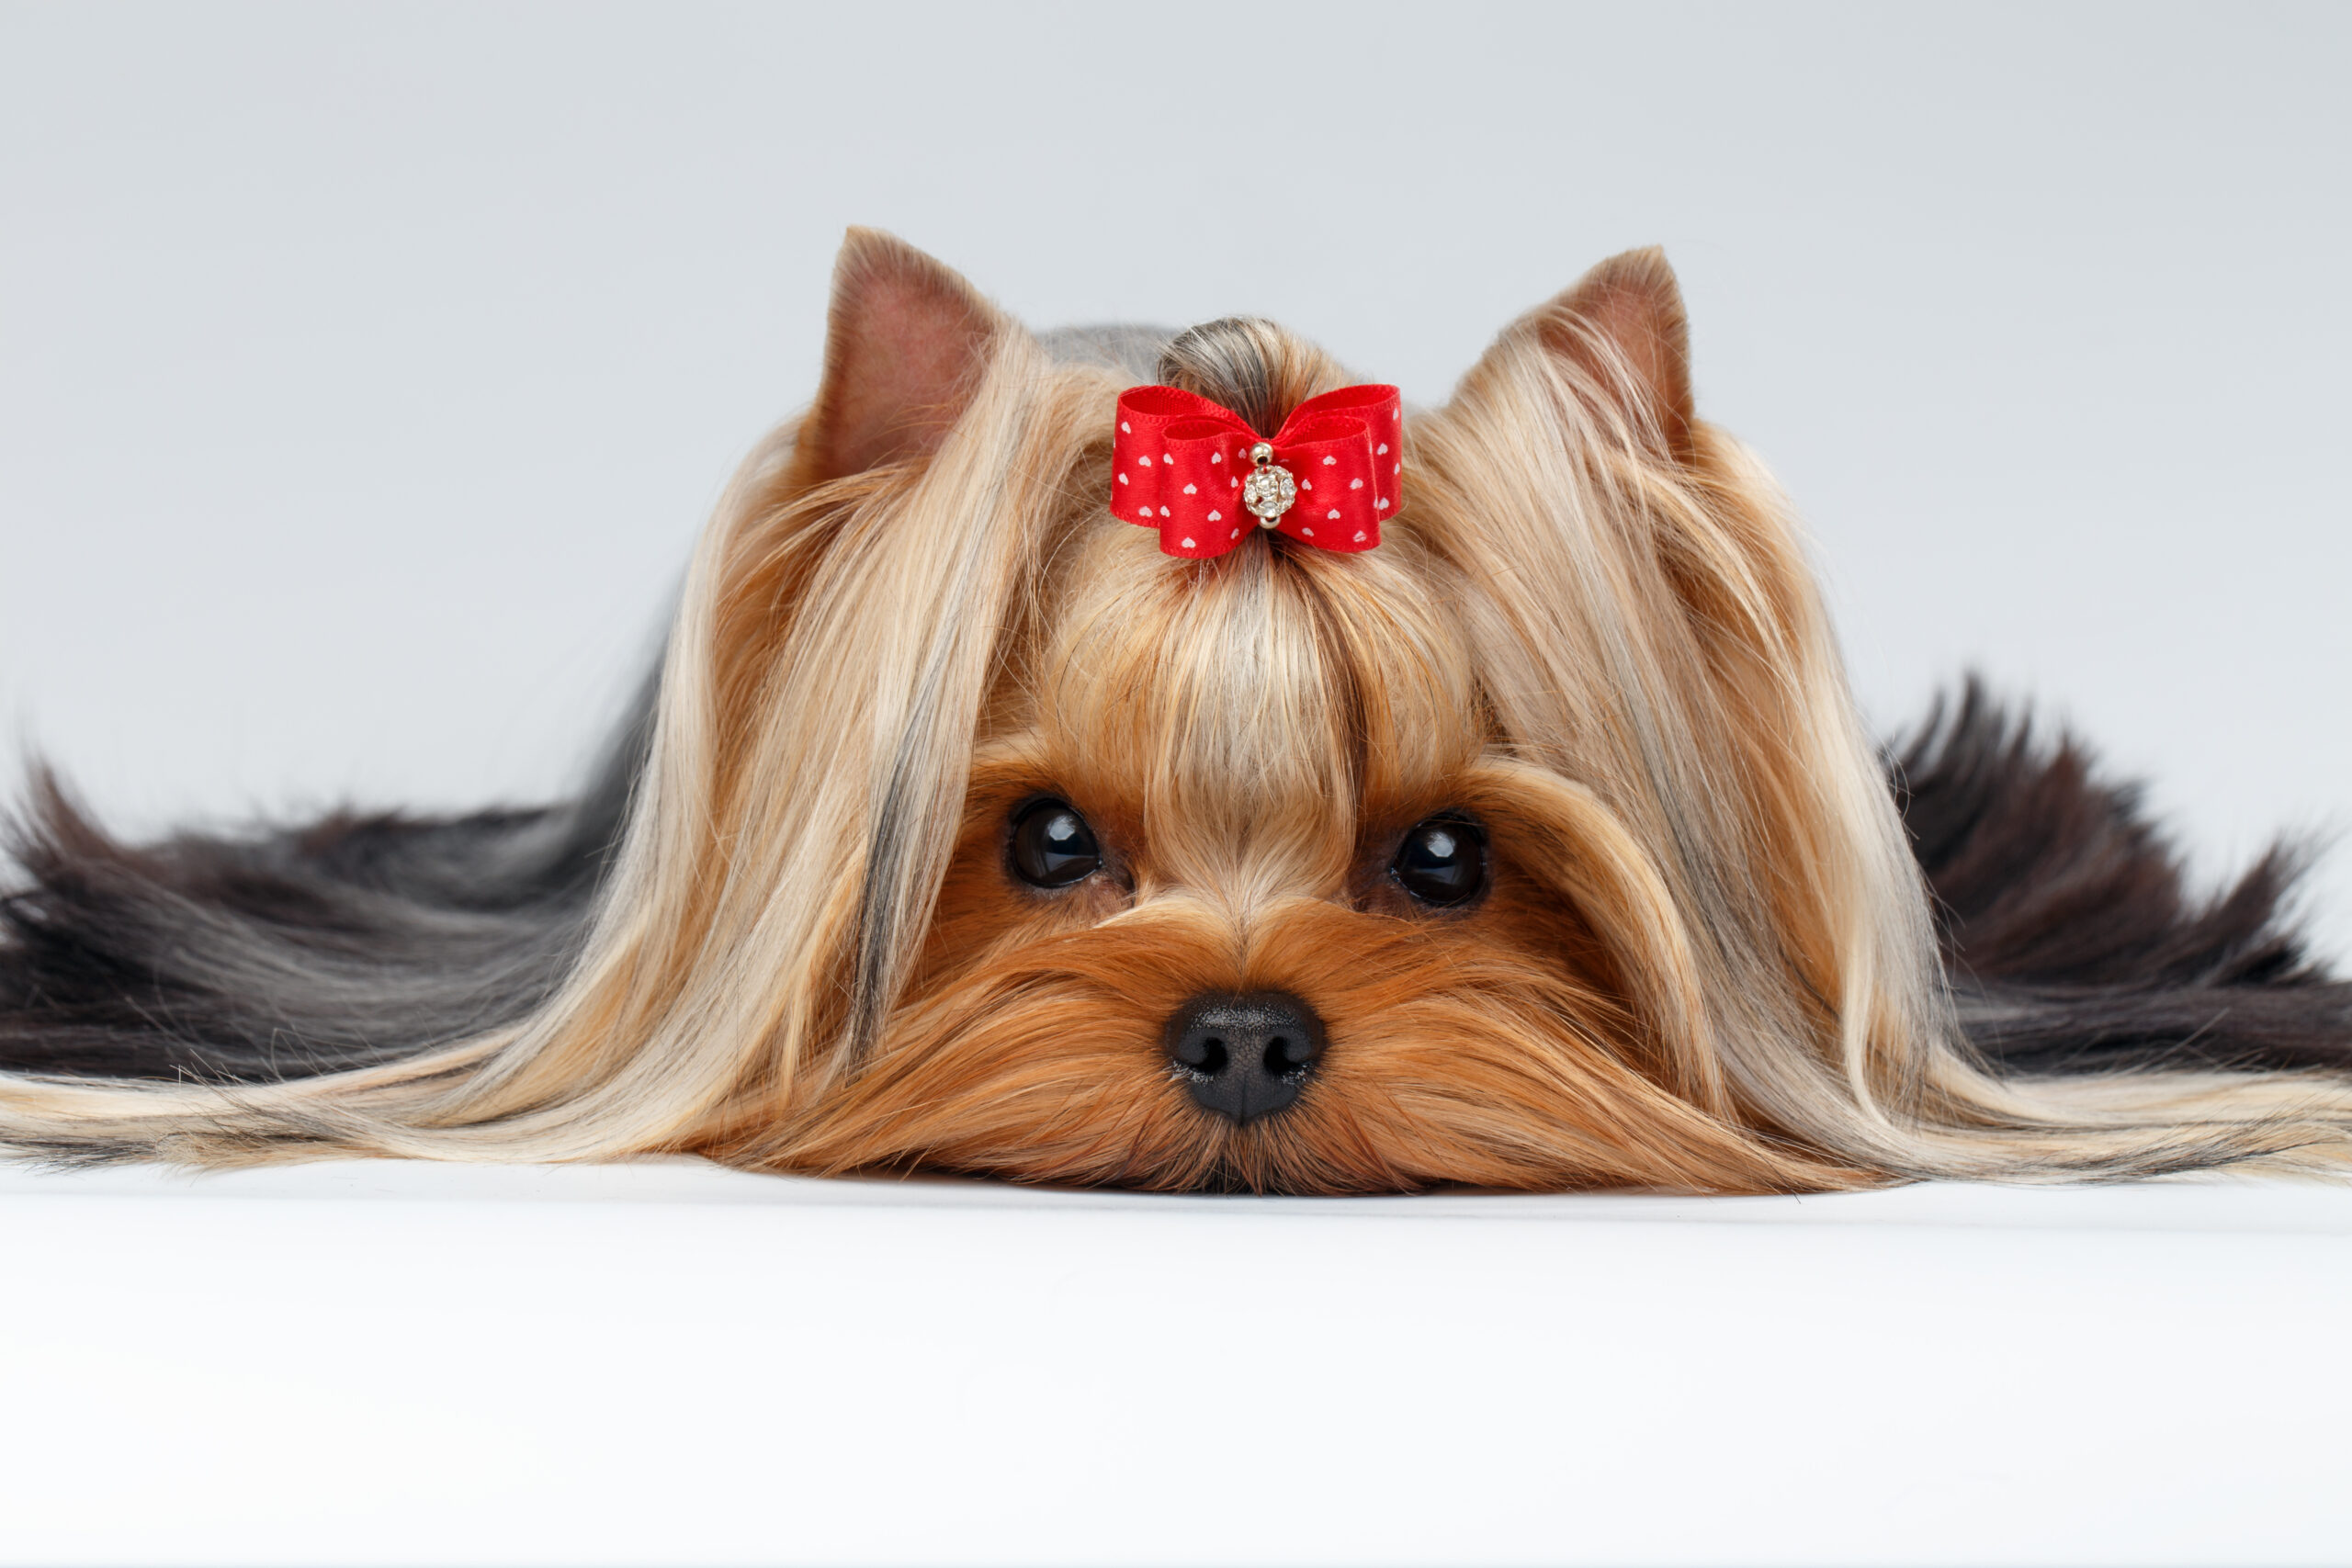 Freshly groomed Yorkshire Terrier Dog with red bow.